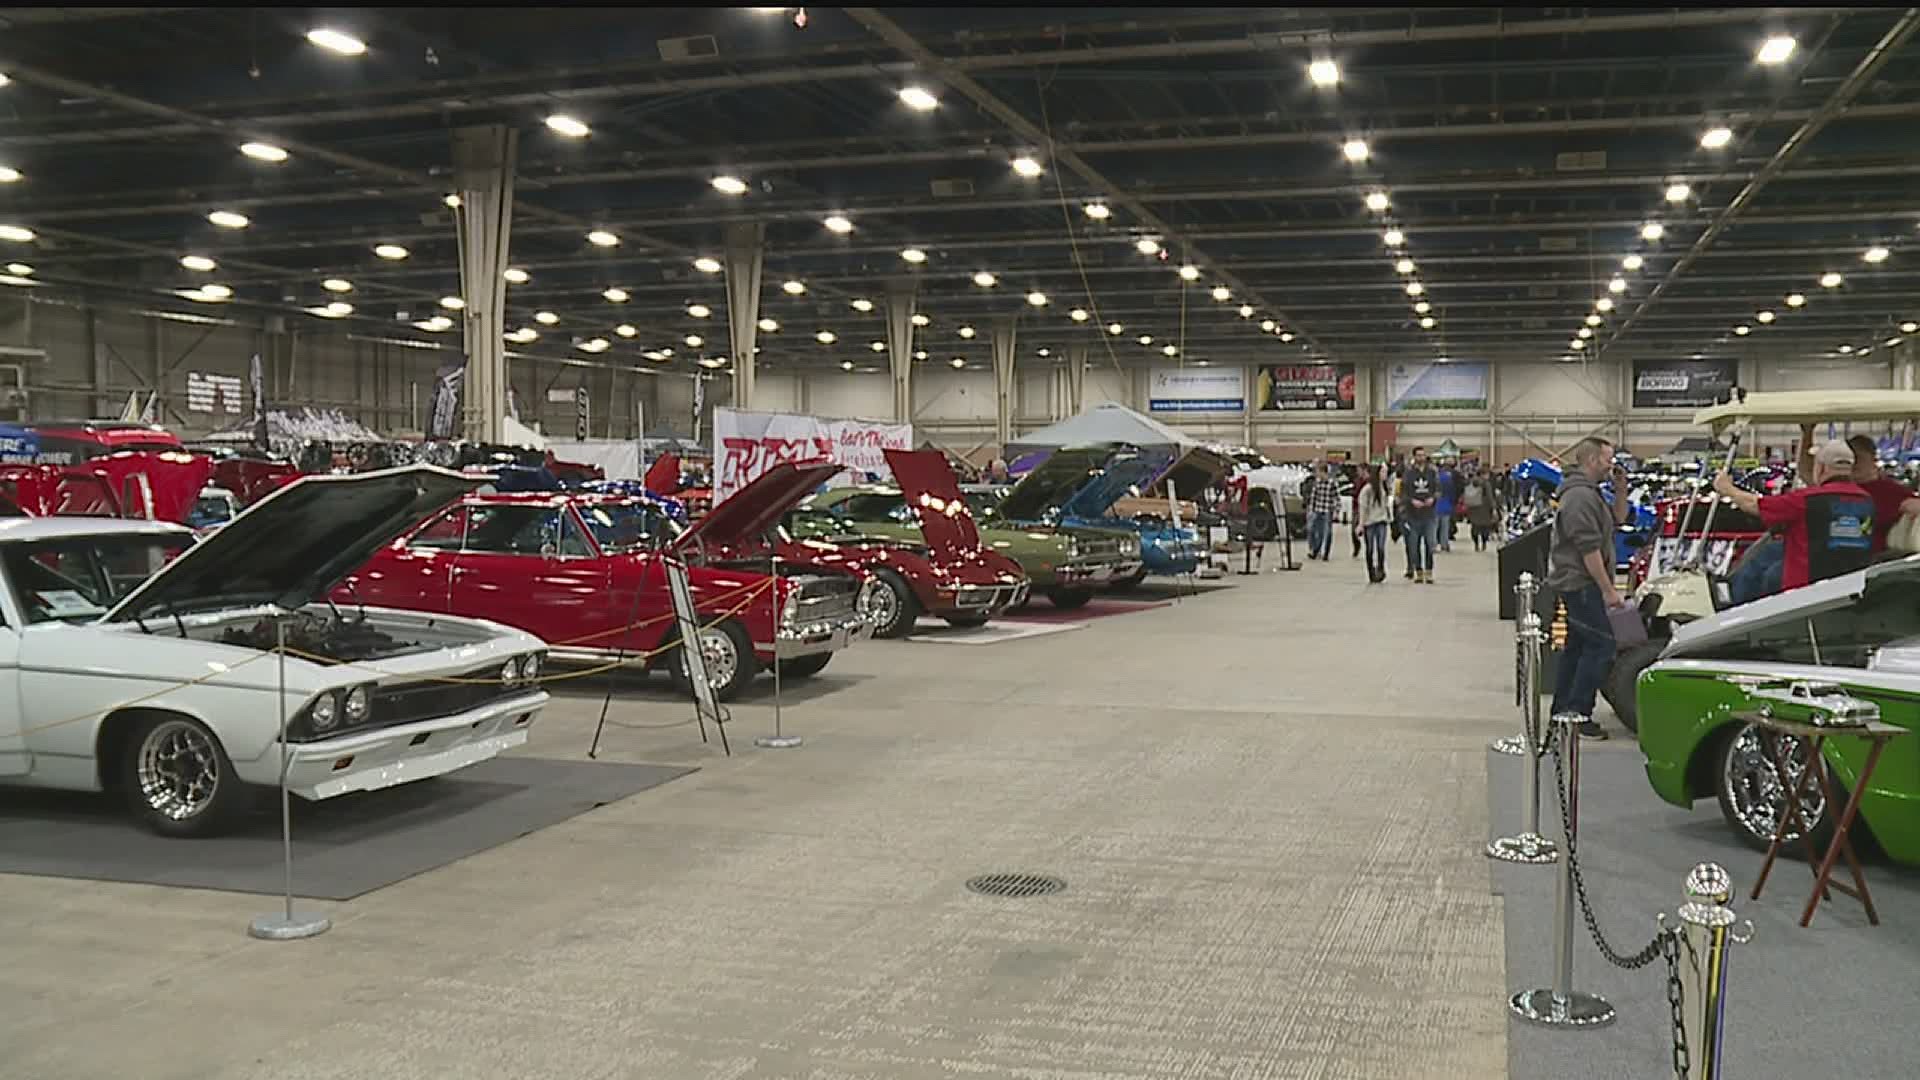 Exhibitors showcased more than 800 race cars at the PA Farm Show Complex on Sunday.